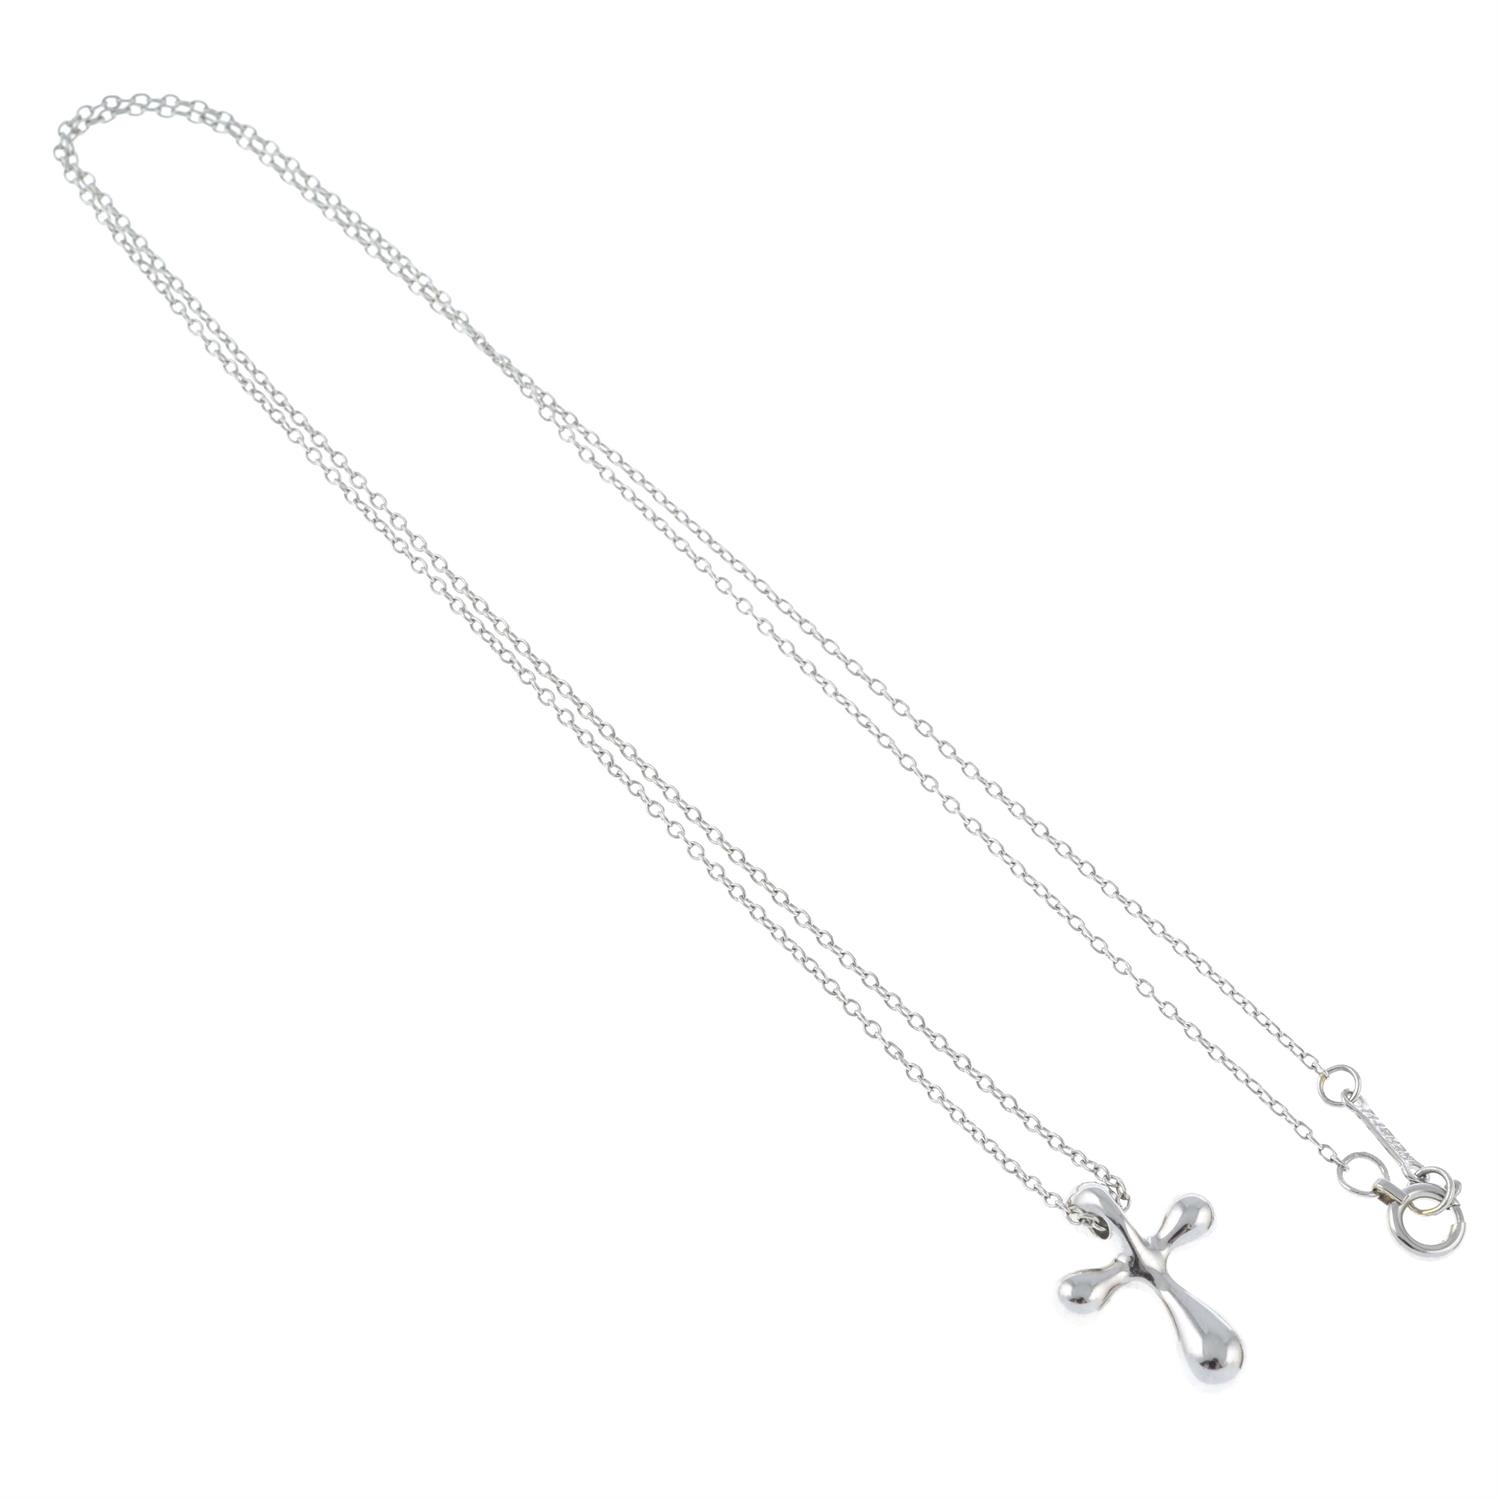 A cross pendant, with chain, by Elsa Peretti for Tiffany & Co. - Image 2 of 3